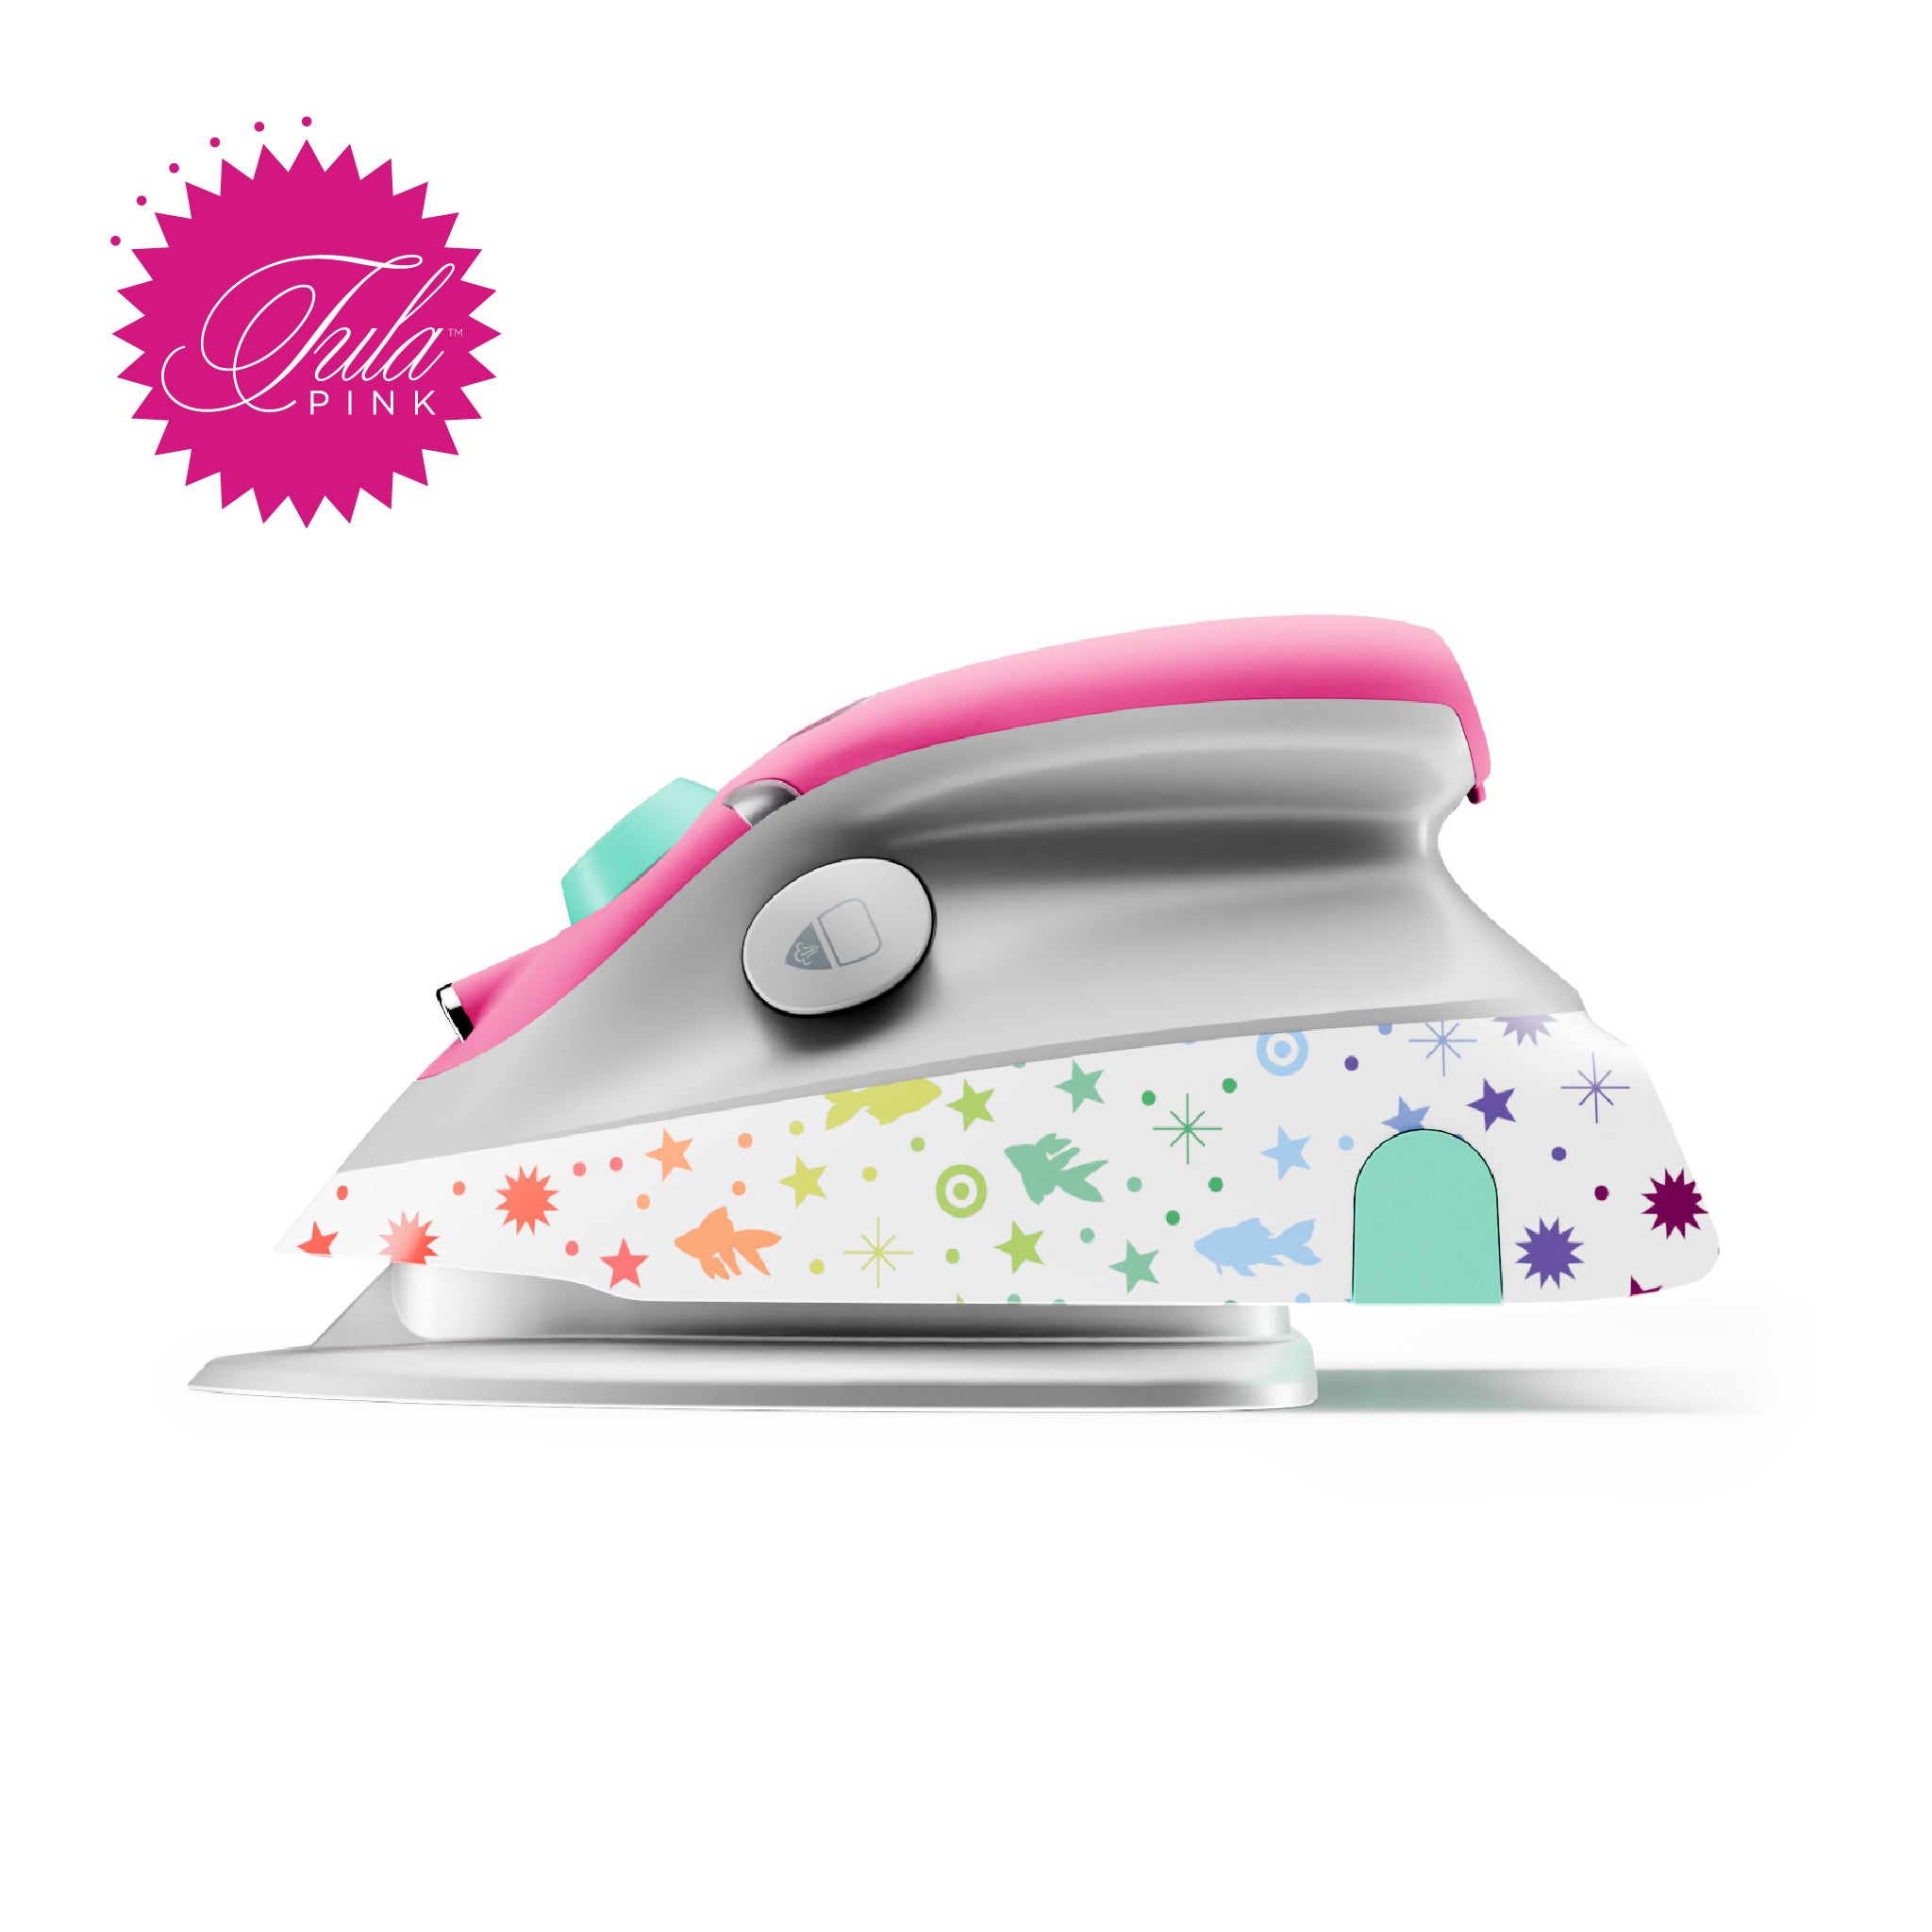 The Tula Pink M3Pro project iron provides full size power in a compact convenient size.